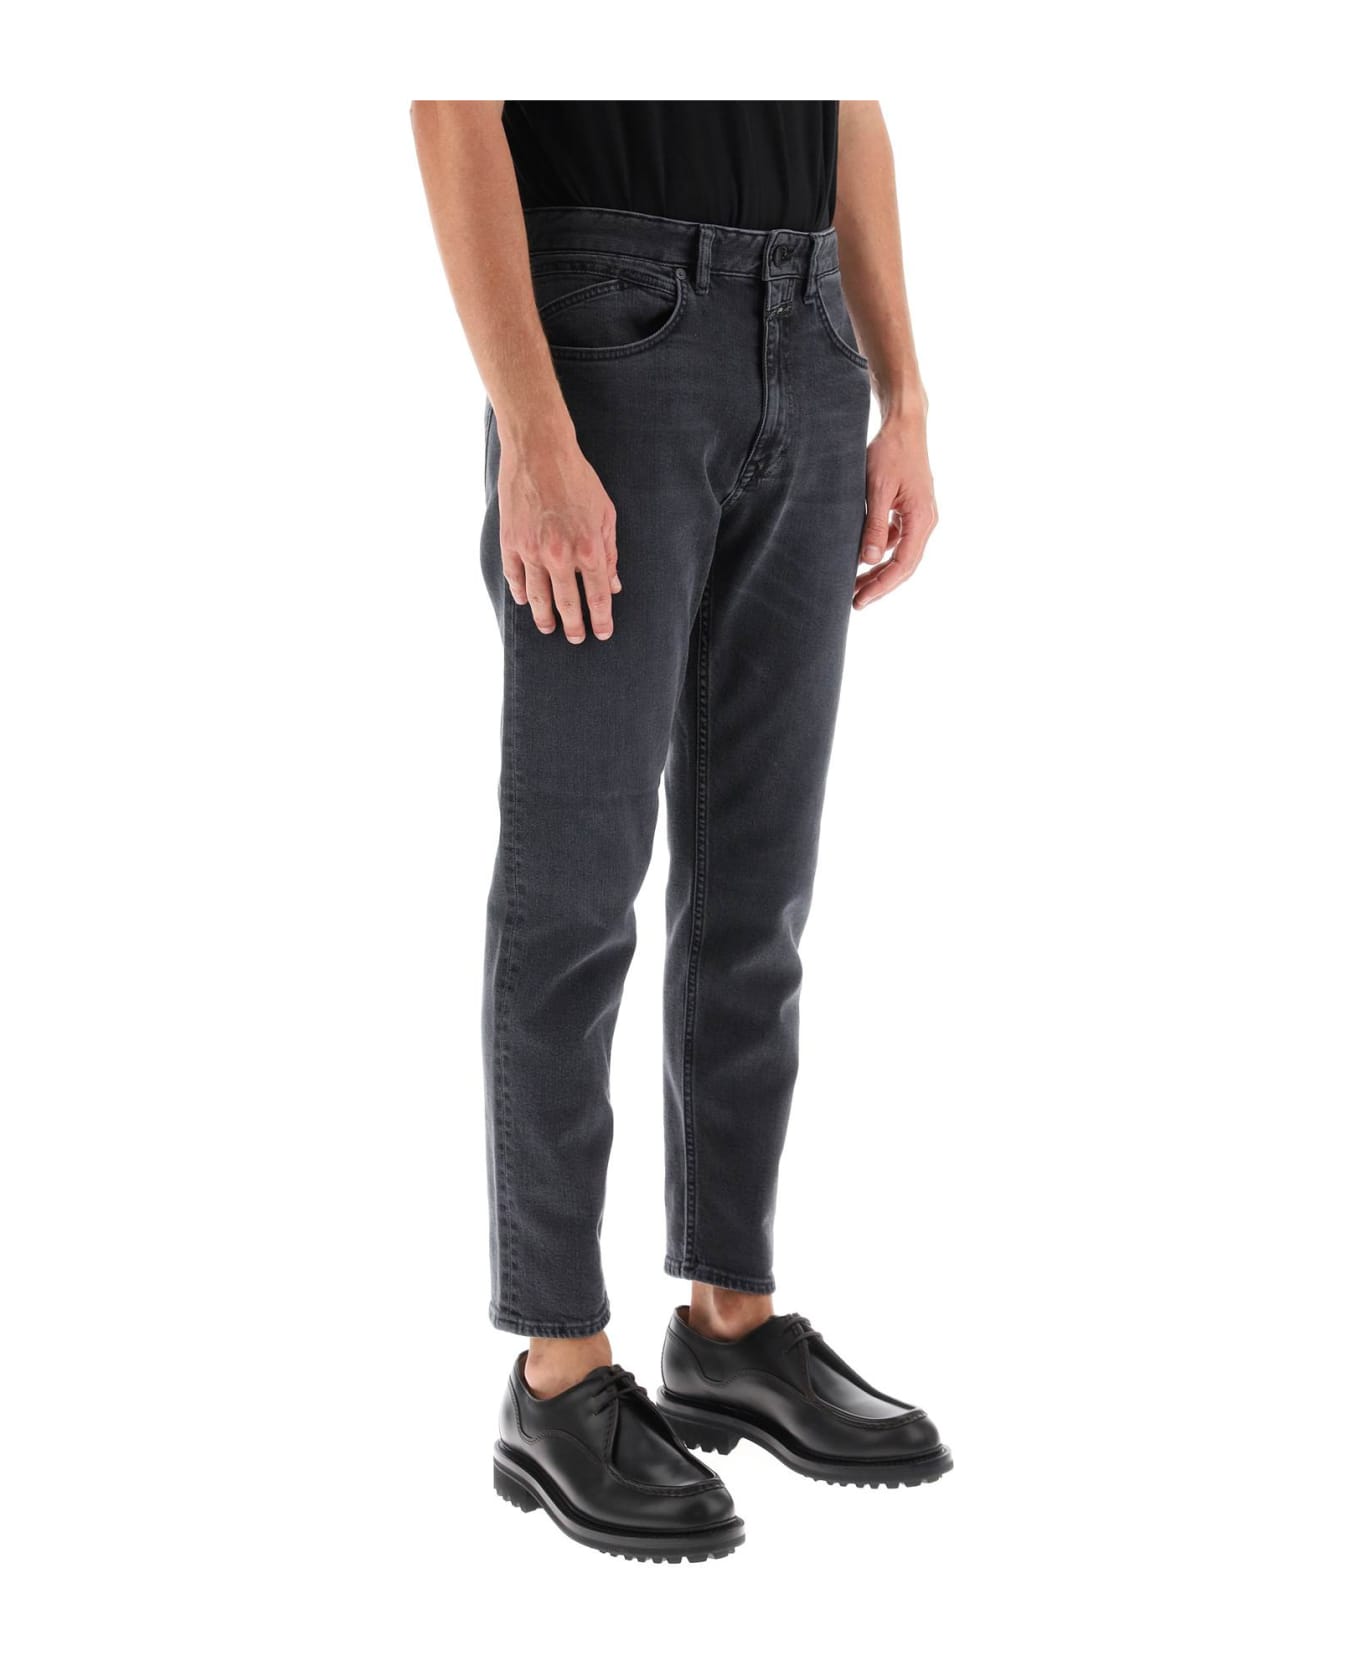 Closed Cooper Jeans With Tapered Cut - DARK GREY (Grey)